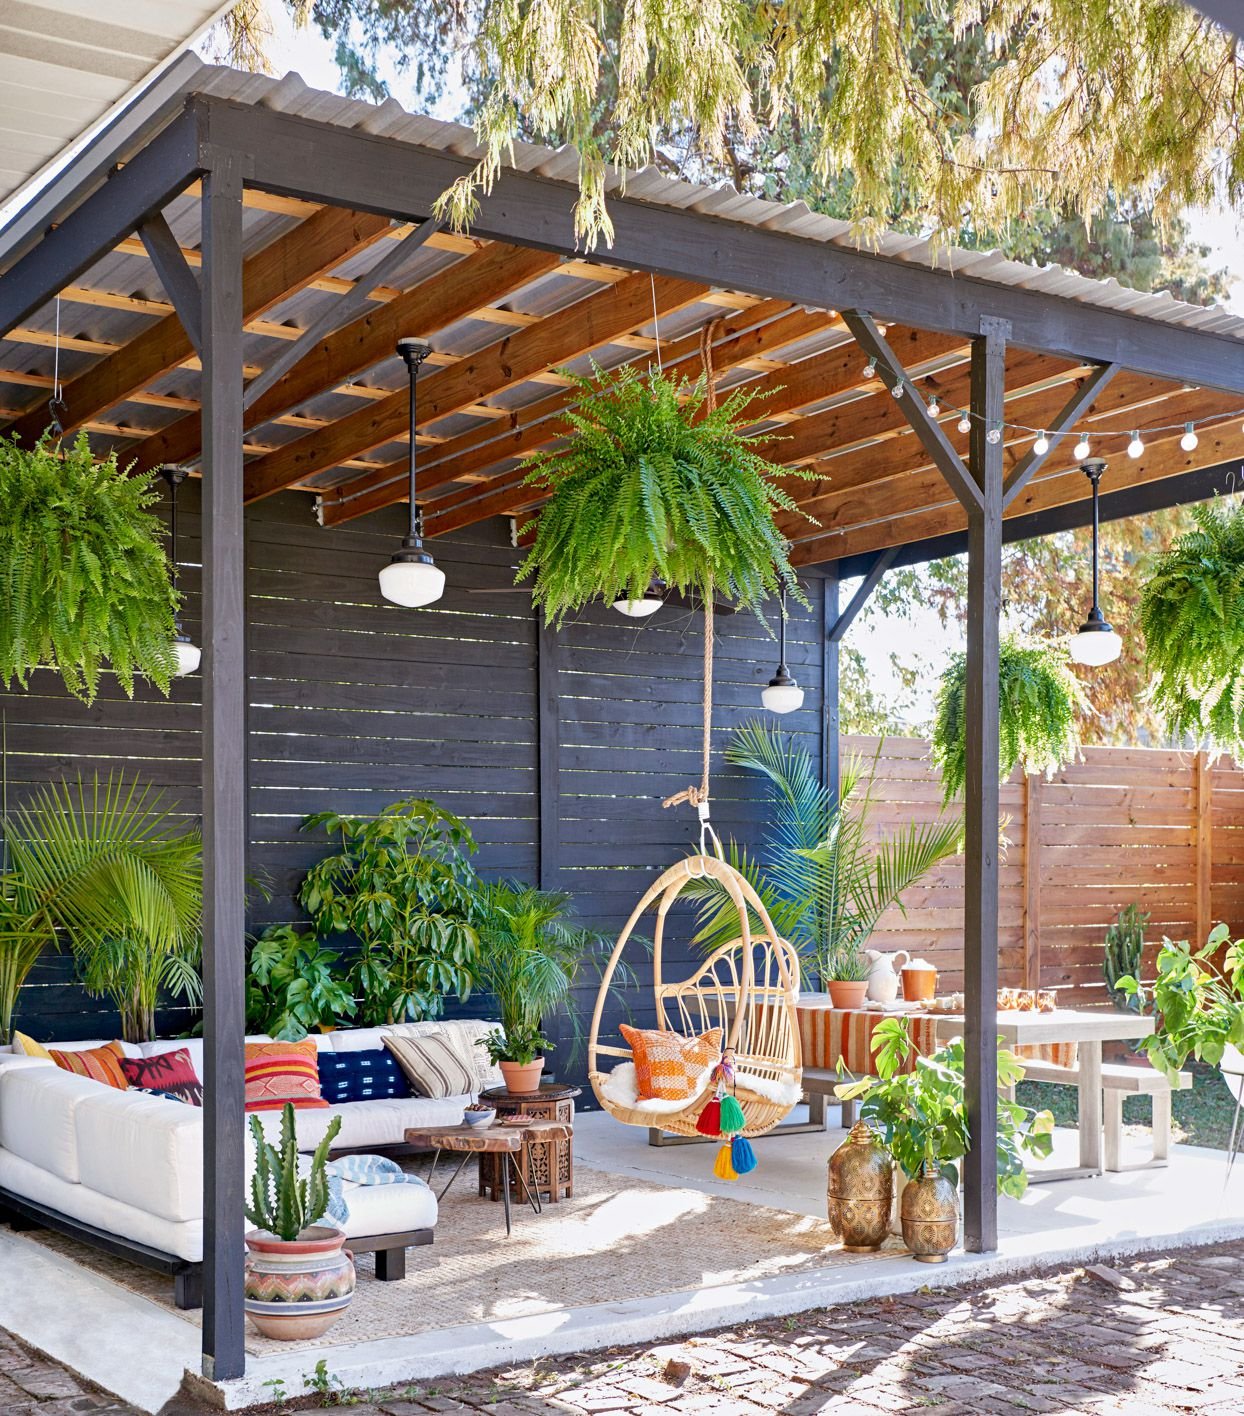 The Art of Choosing the Perfect Shade for Your Outdoor Space